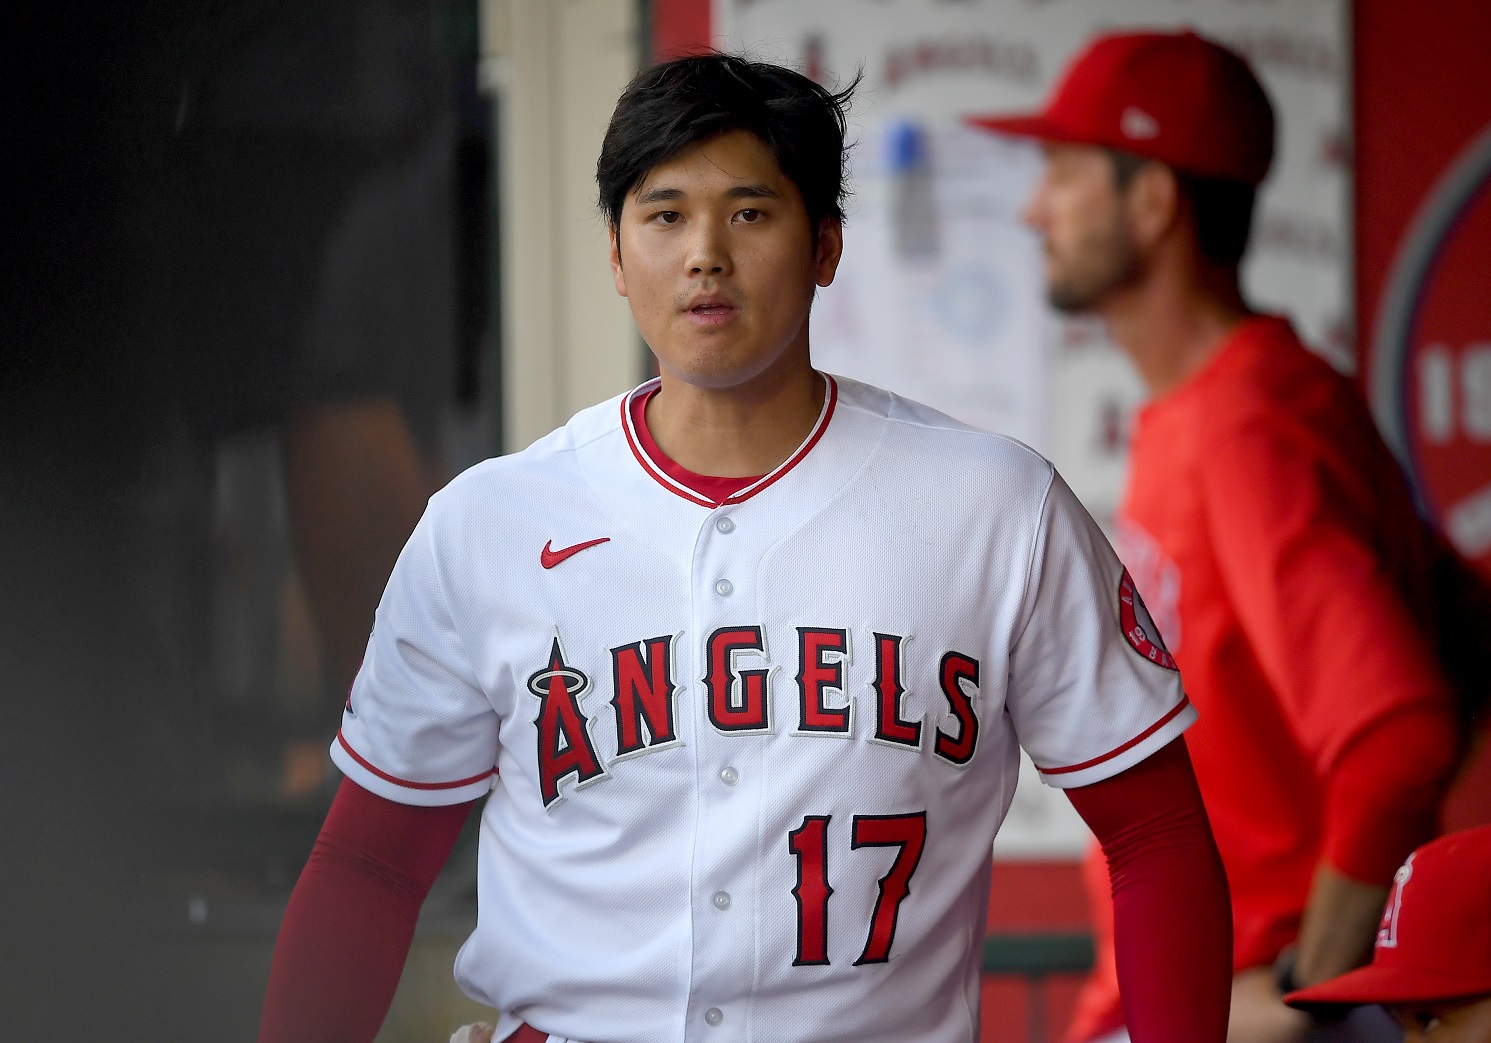 Shohei Ohtani of the Los Angeles Angels in the dugout during the game against the Seattle Mariners at Angel Stadium of Anaheim on July 16, 2021.